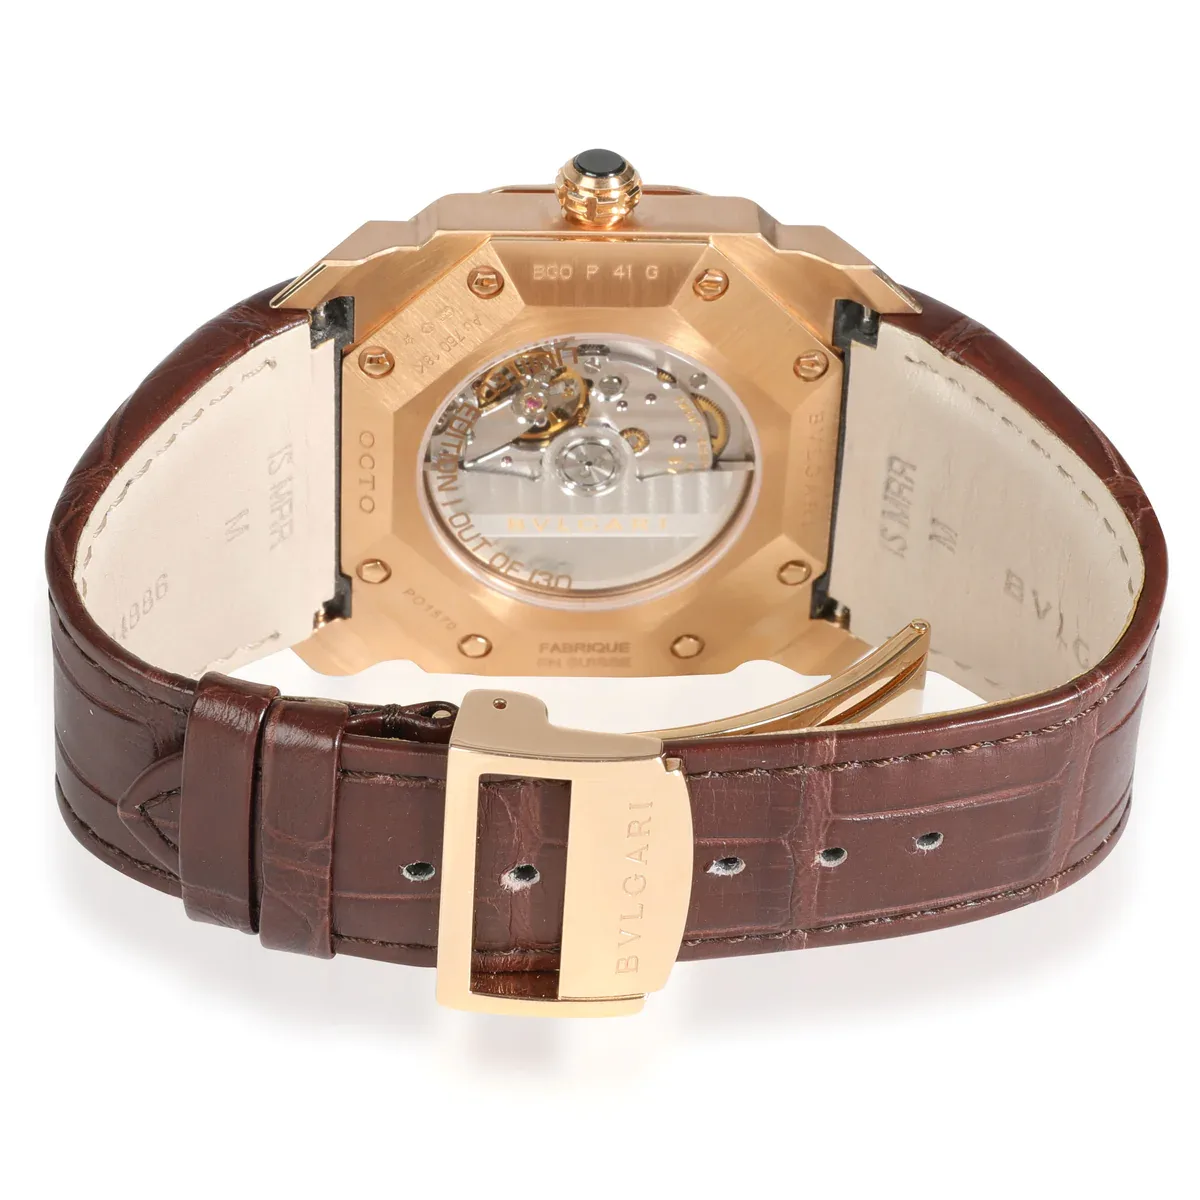 Bvlgari Octo Solotempo Criollo 41 Rose Gold / Brown / Arabic / Strap - Limited to 130 Pieces 102250 BGO P 41 G Listing Image 3